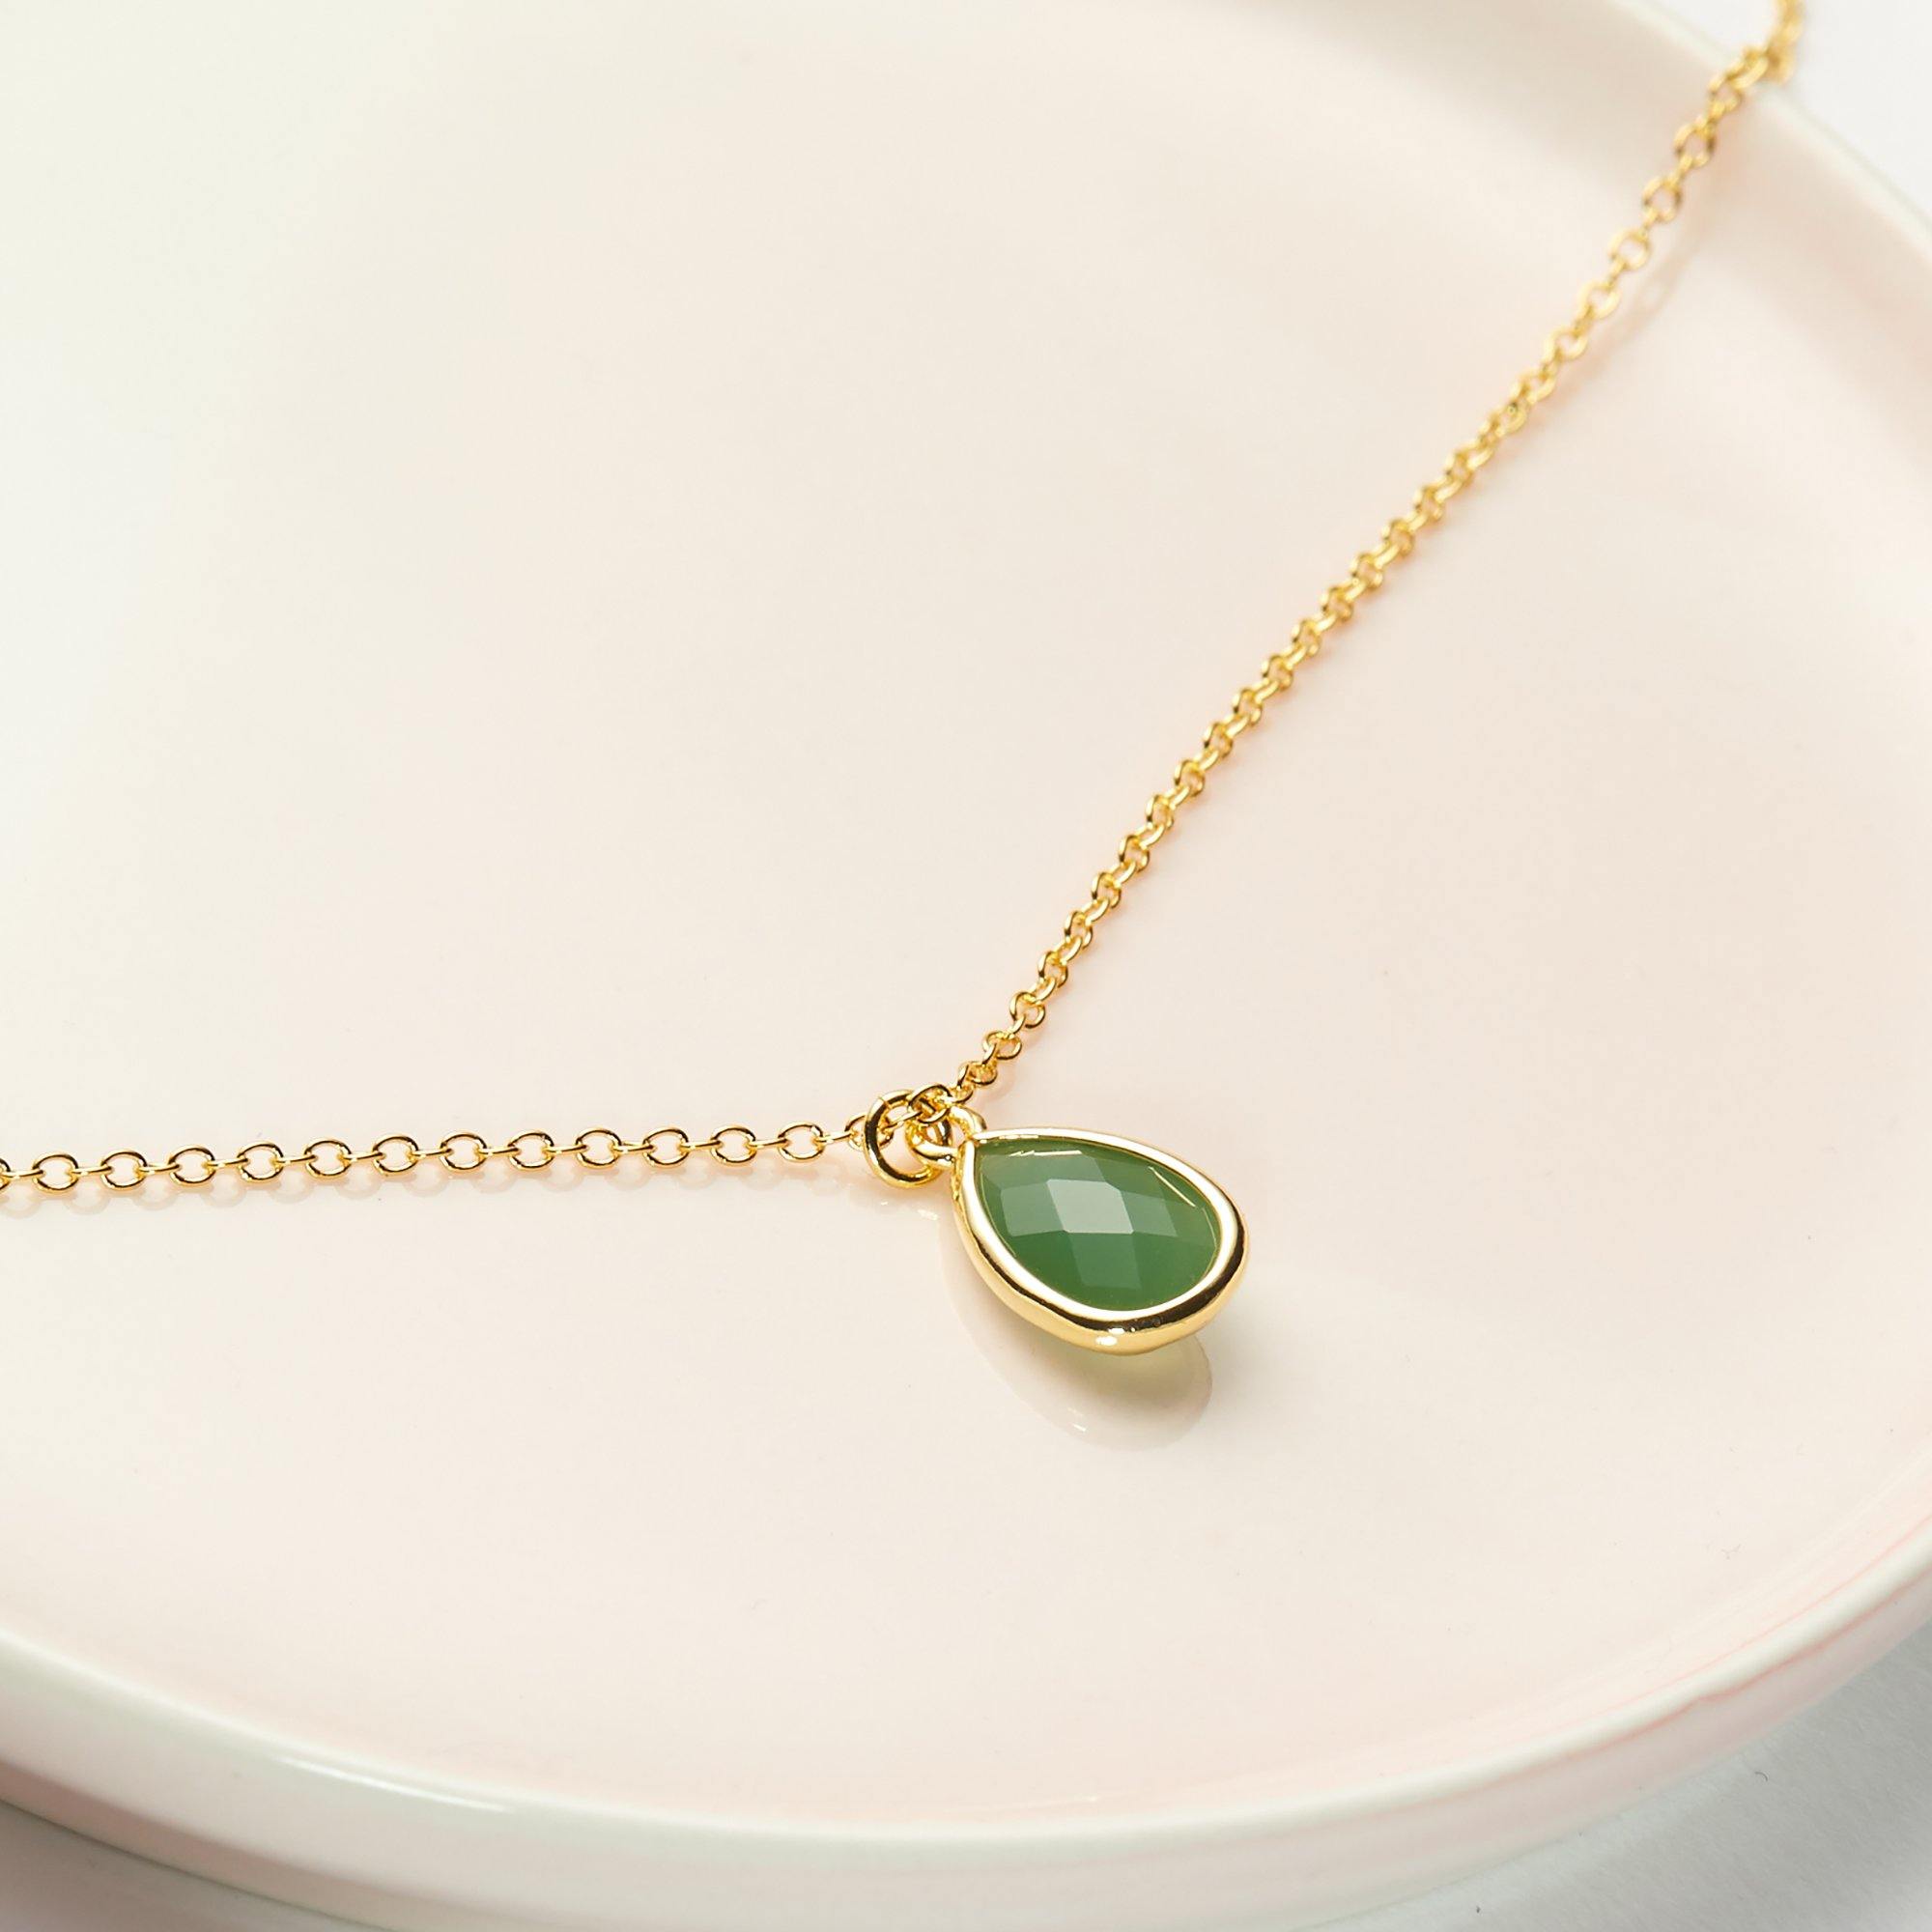 Mini Emerald Heart Necklace – The Healing Pear